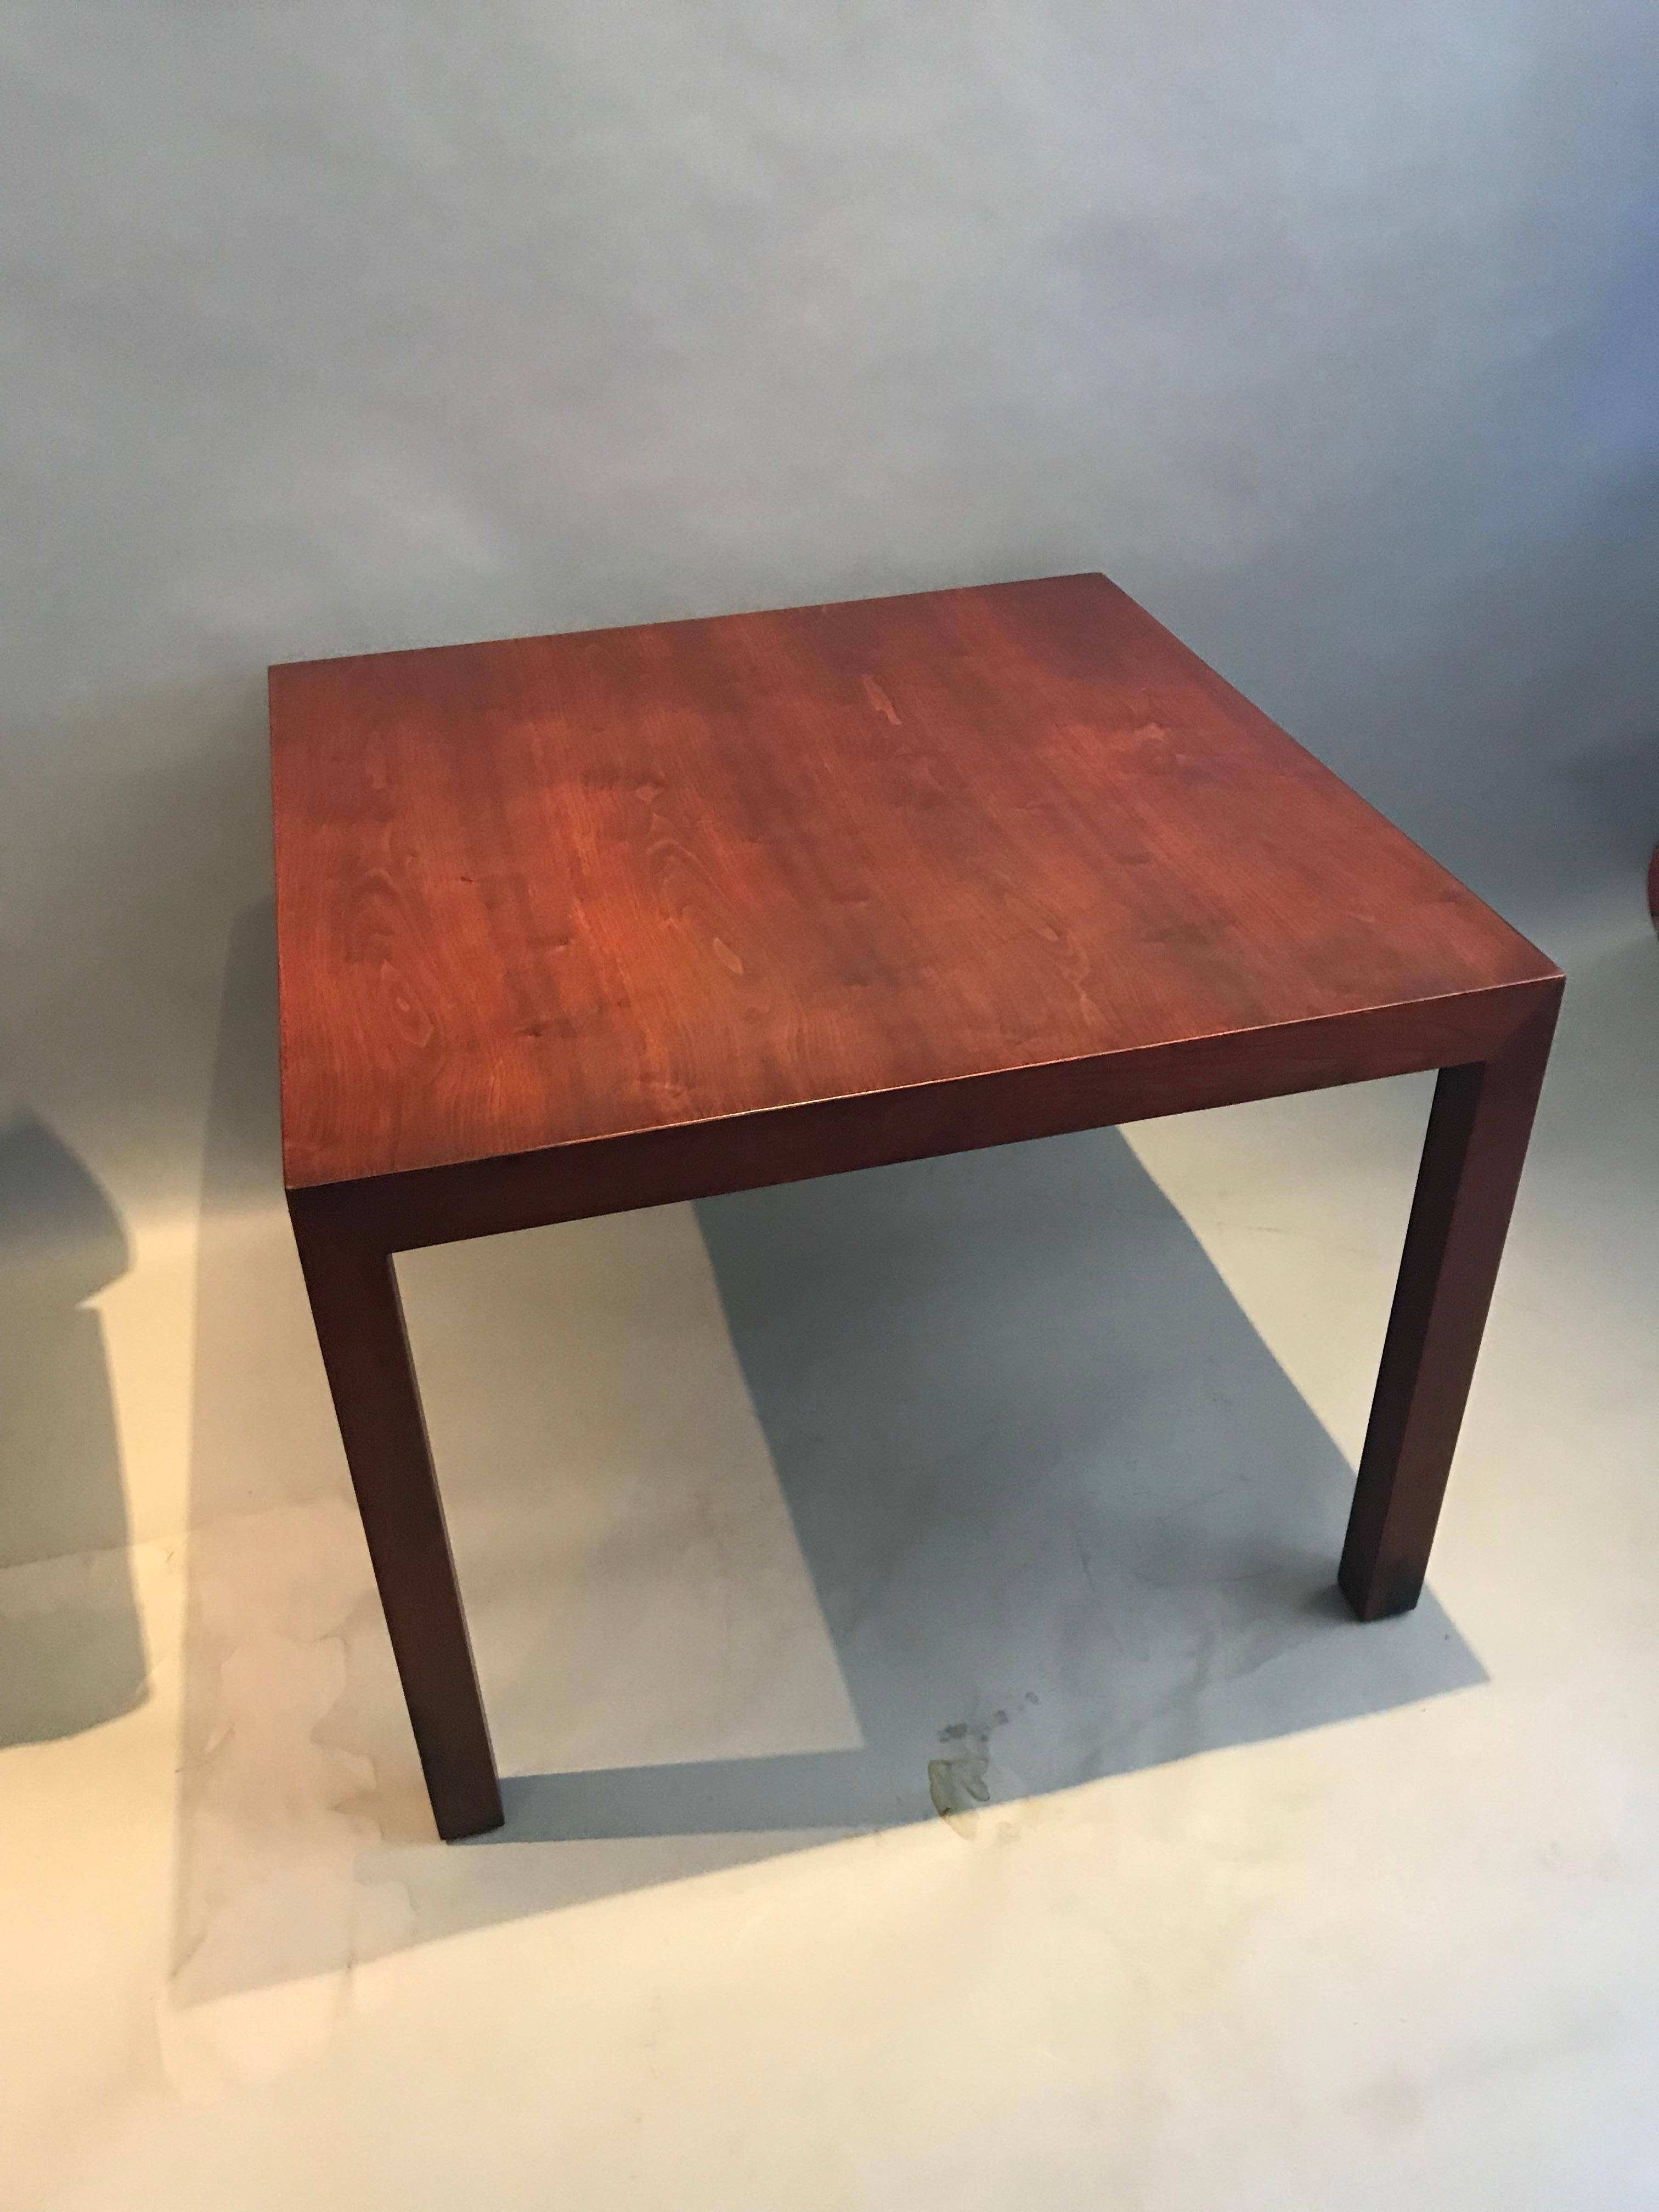 Gorgeous side or end table designed by Edward Wormley for Dunbar. A lovely walnut patina accompanies the evening and dramatic walnut grain patterns. Even color throughout with normal wear. The table is large enough to display a sculpture, plants, or